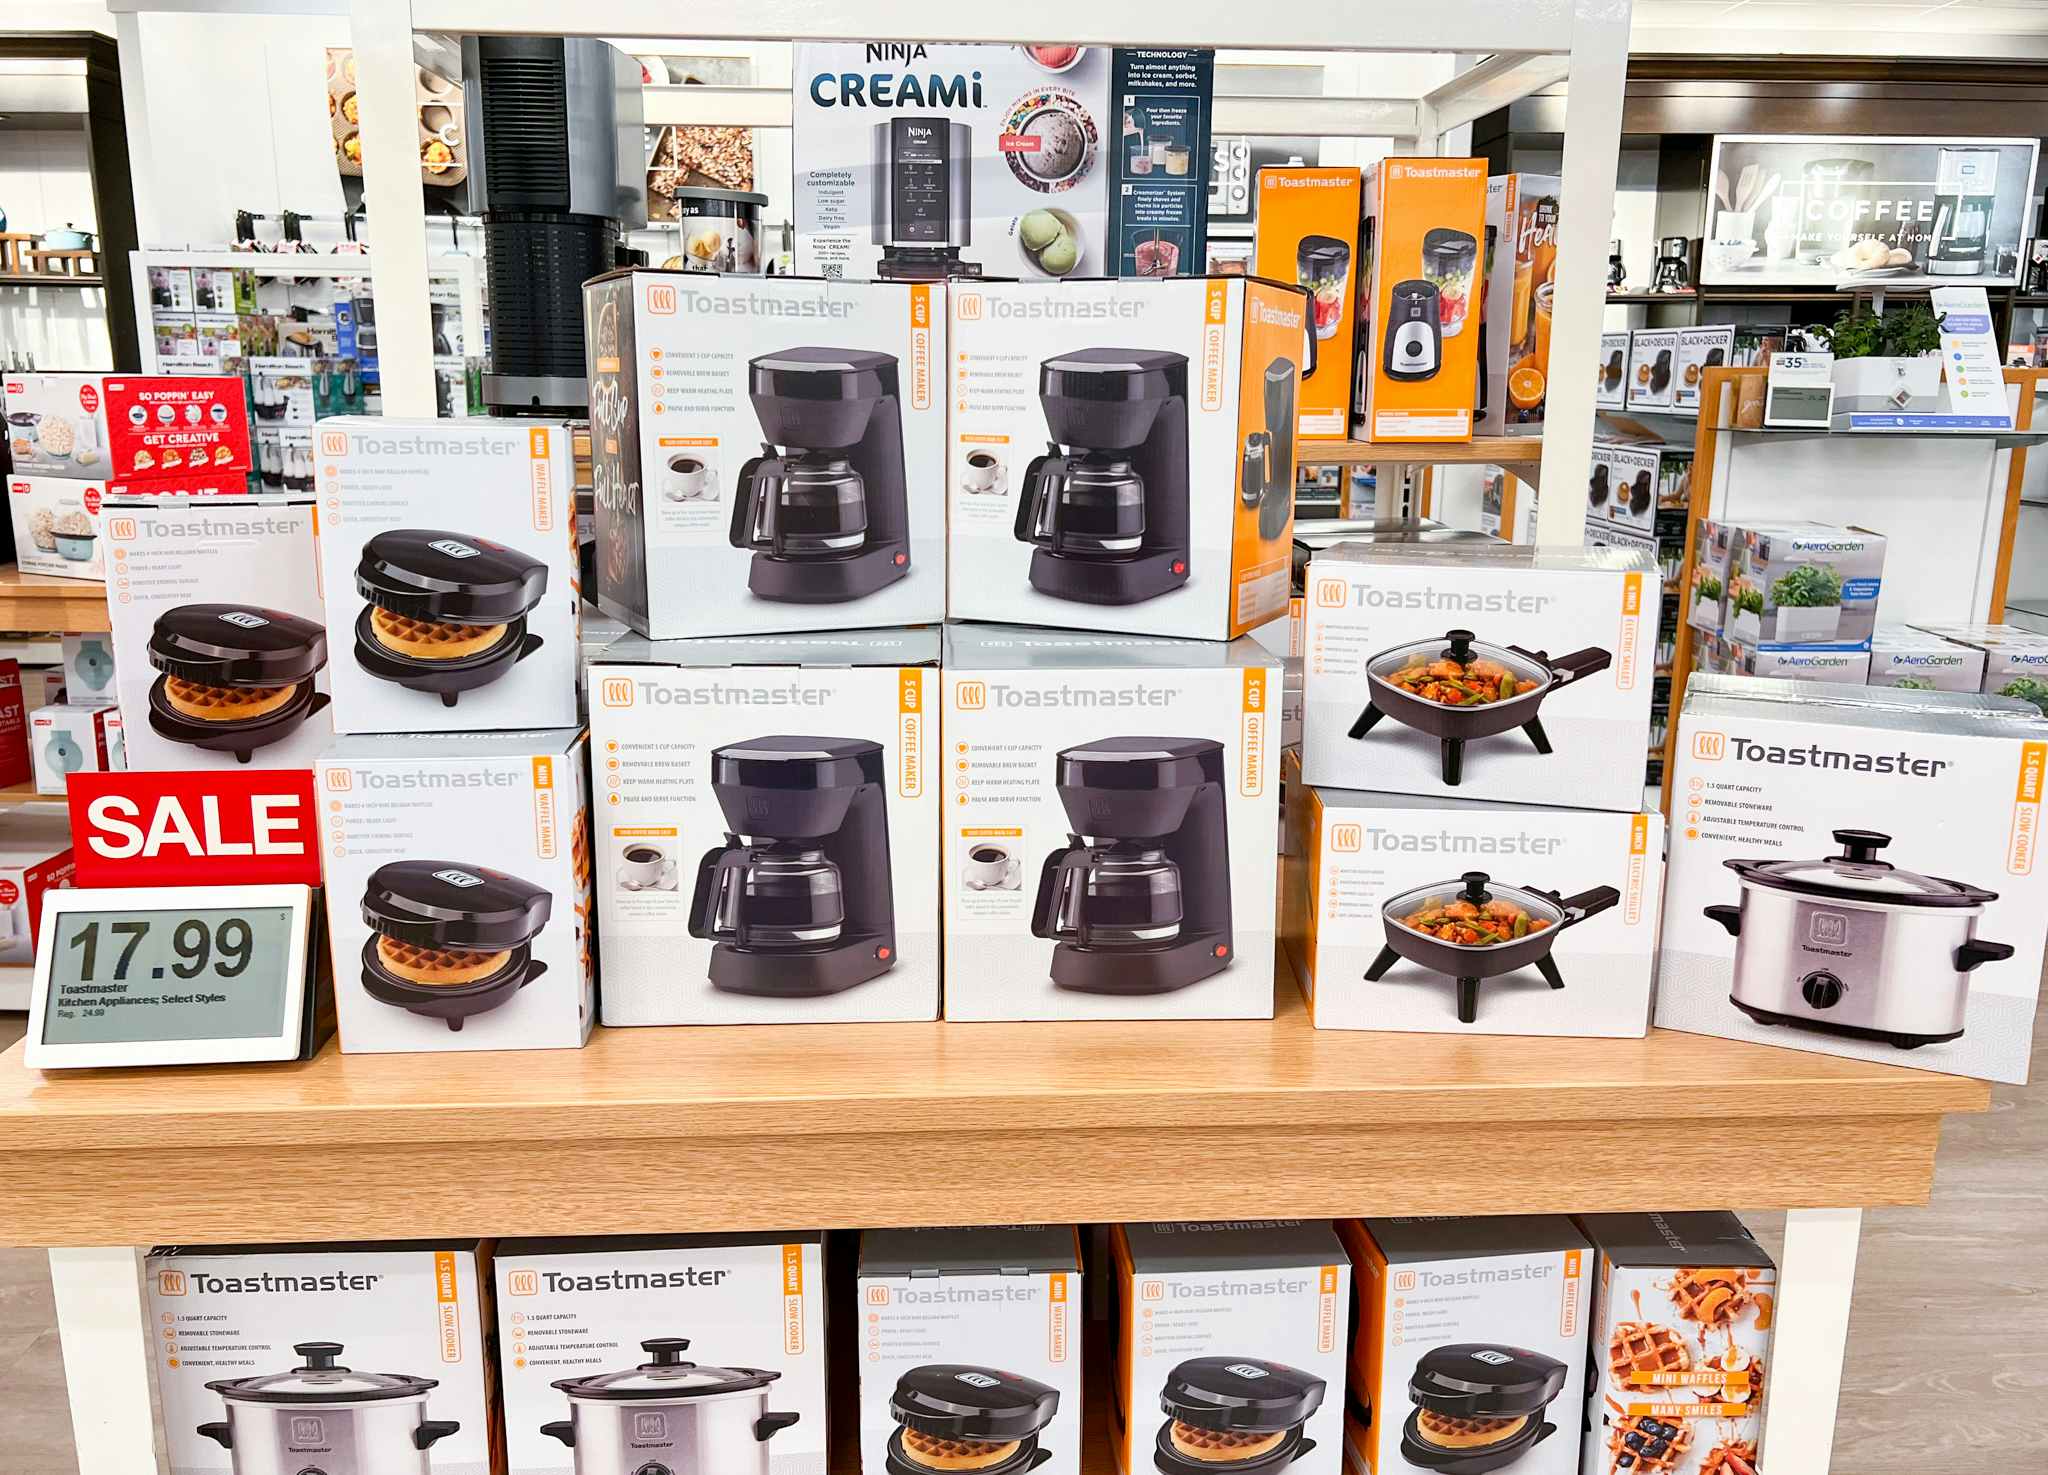 Table of waffle makers, coffee makers and skillets next to a sale sign